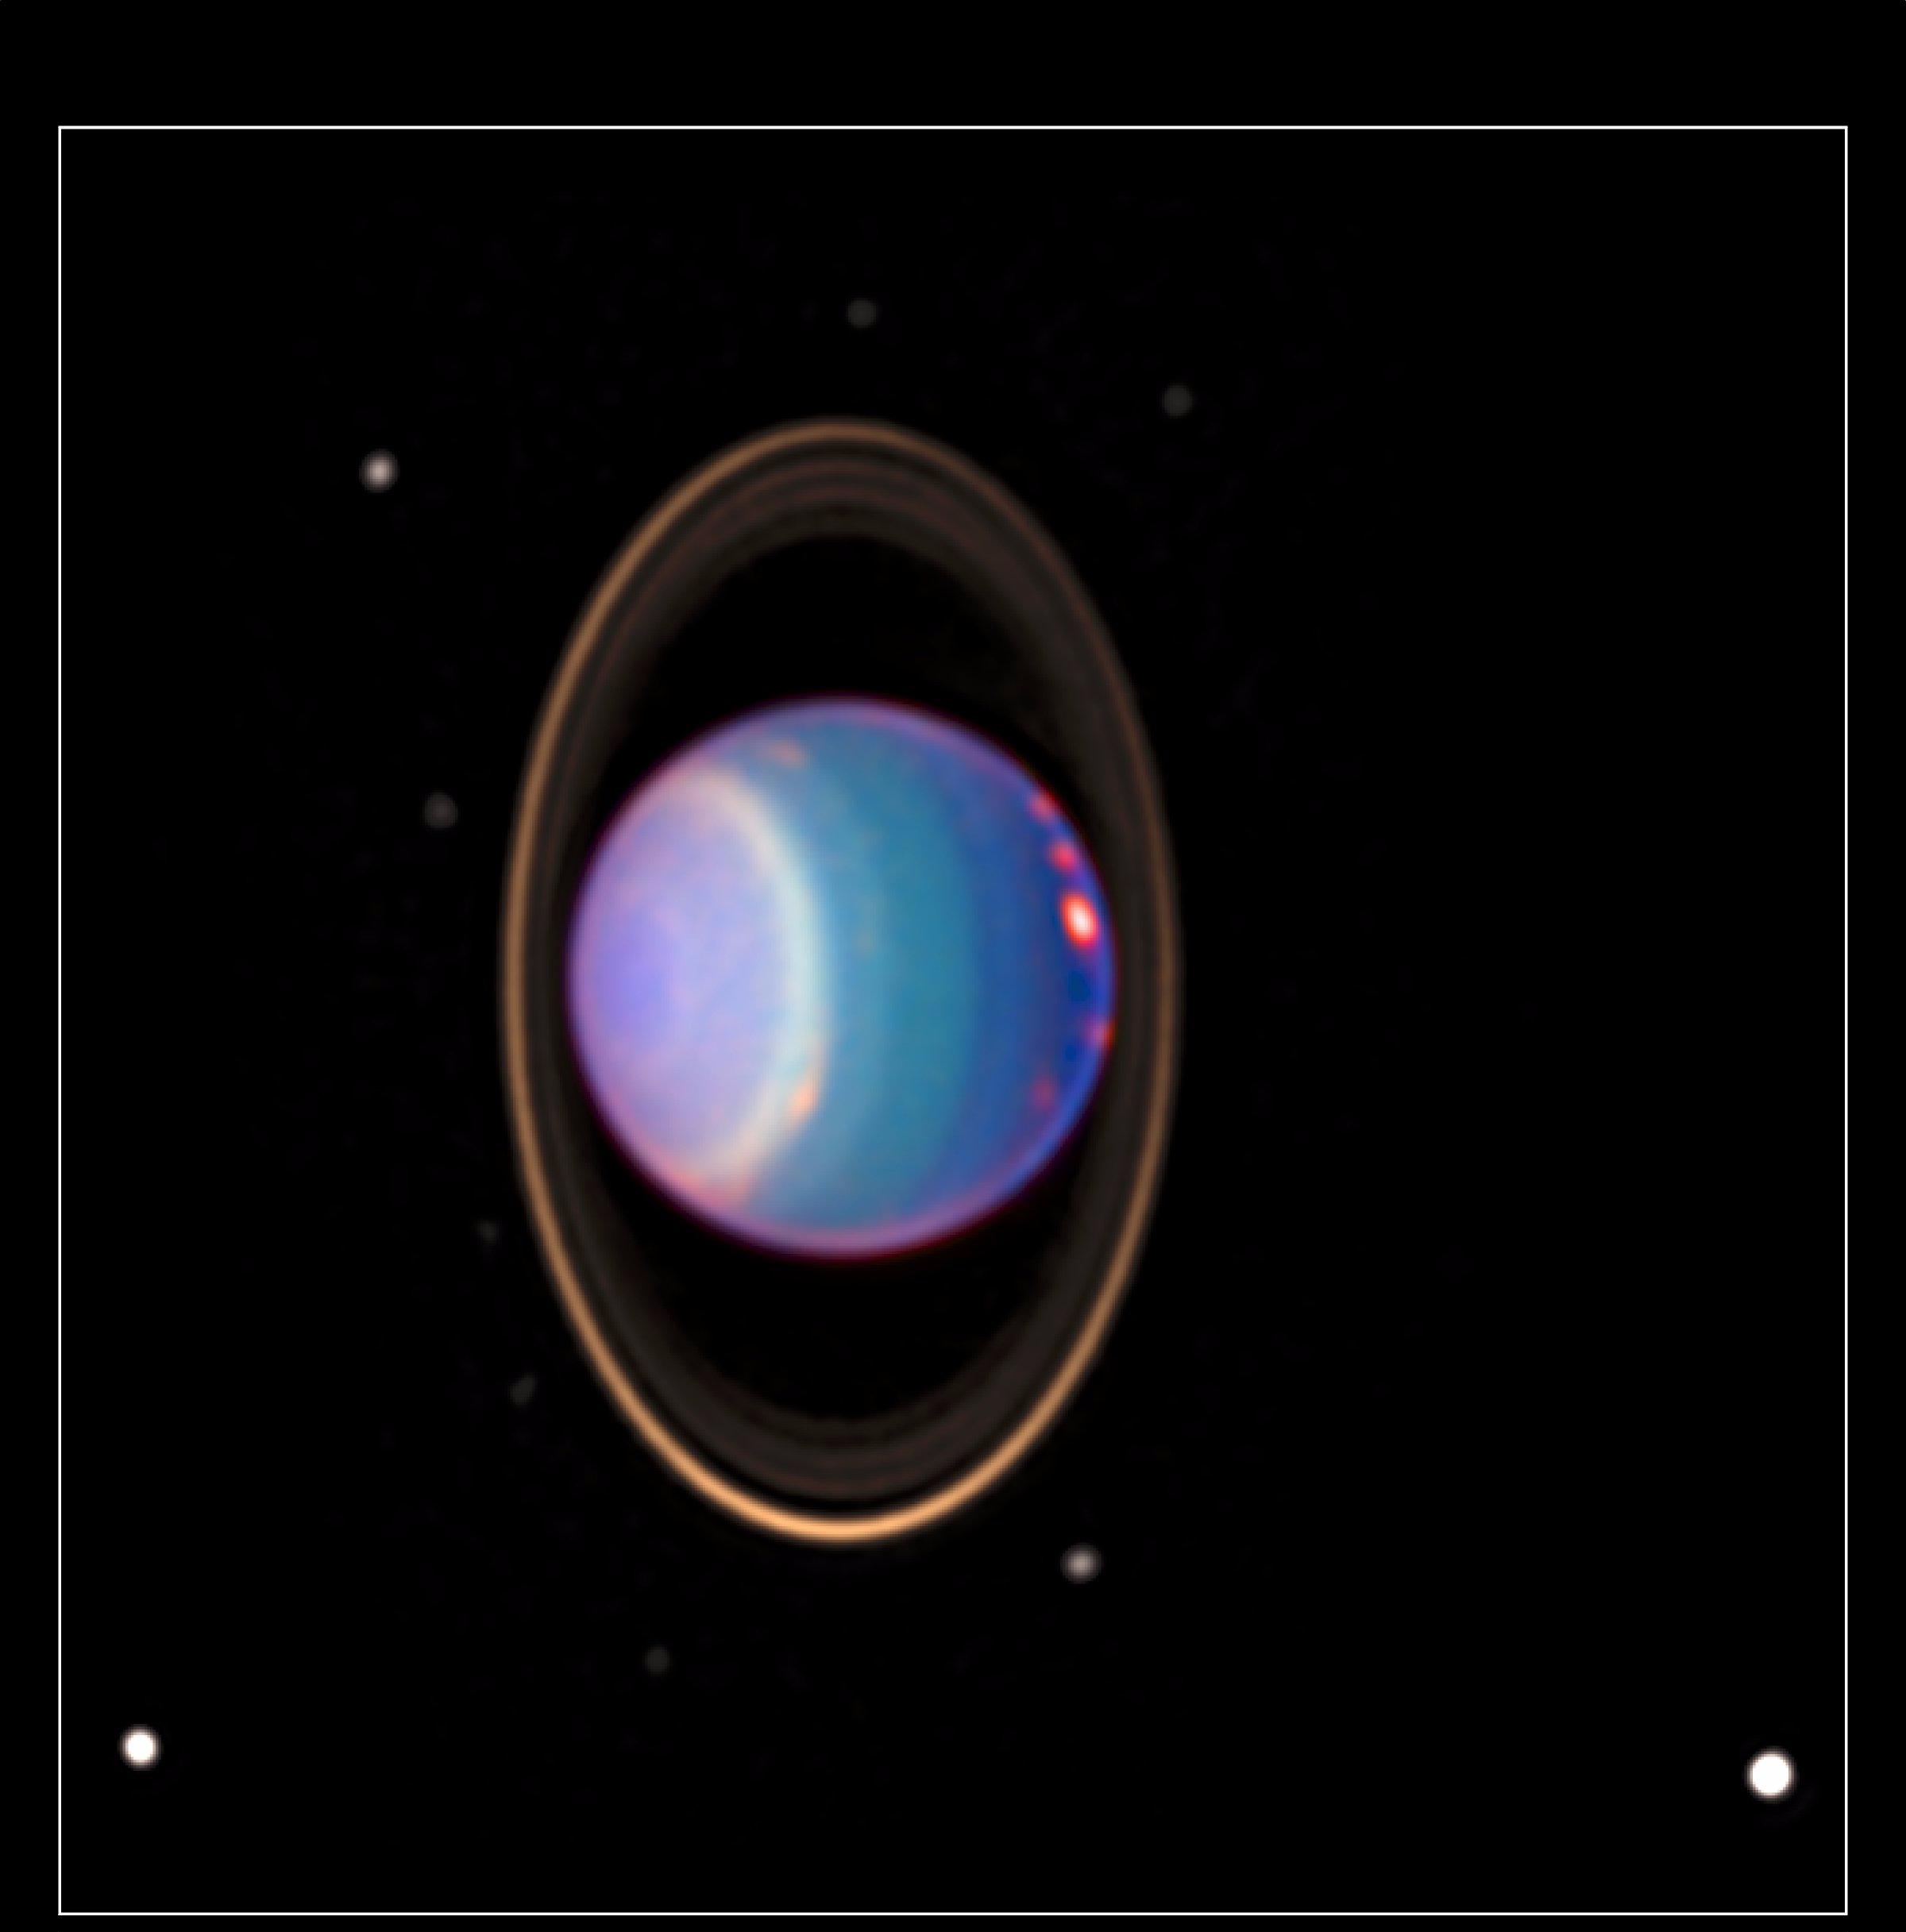 A recent Hubble Space Telescope view reveals Uranus surrounded by its four major rings and by 10 of its 17 known satellites.